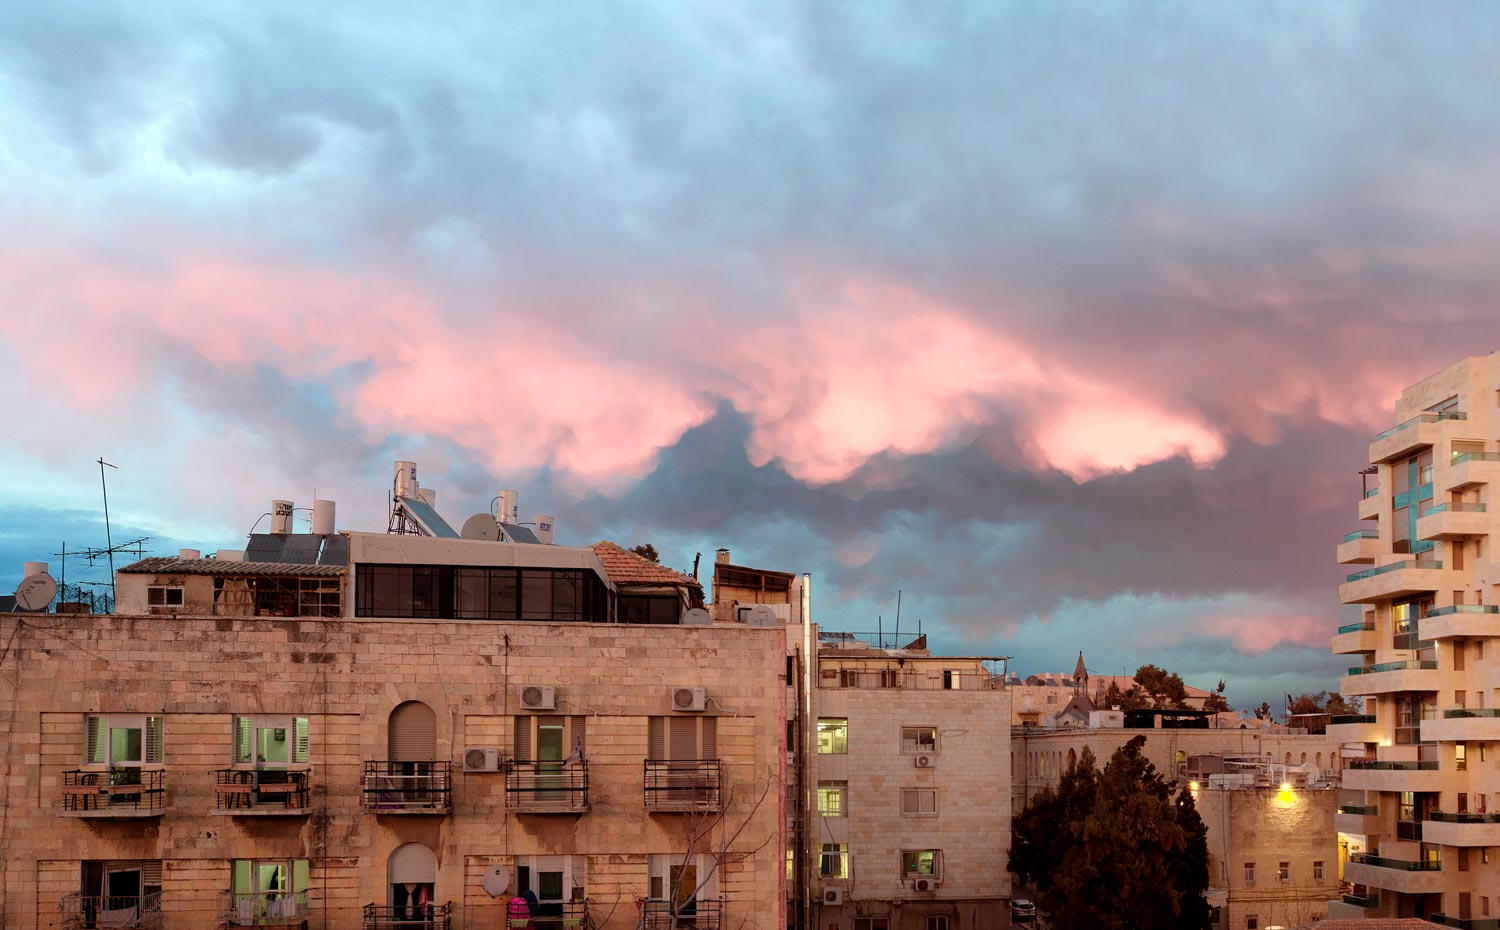  Colorful and interesting clouds from the balcony of our Air BnB flat 